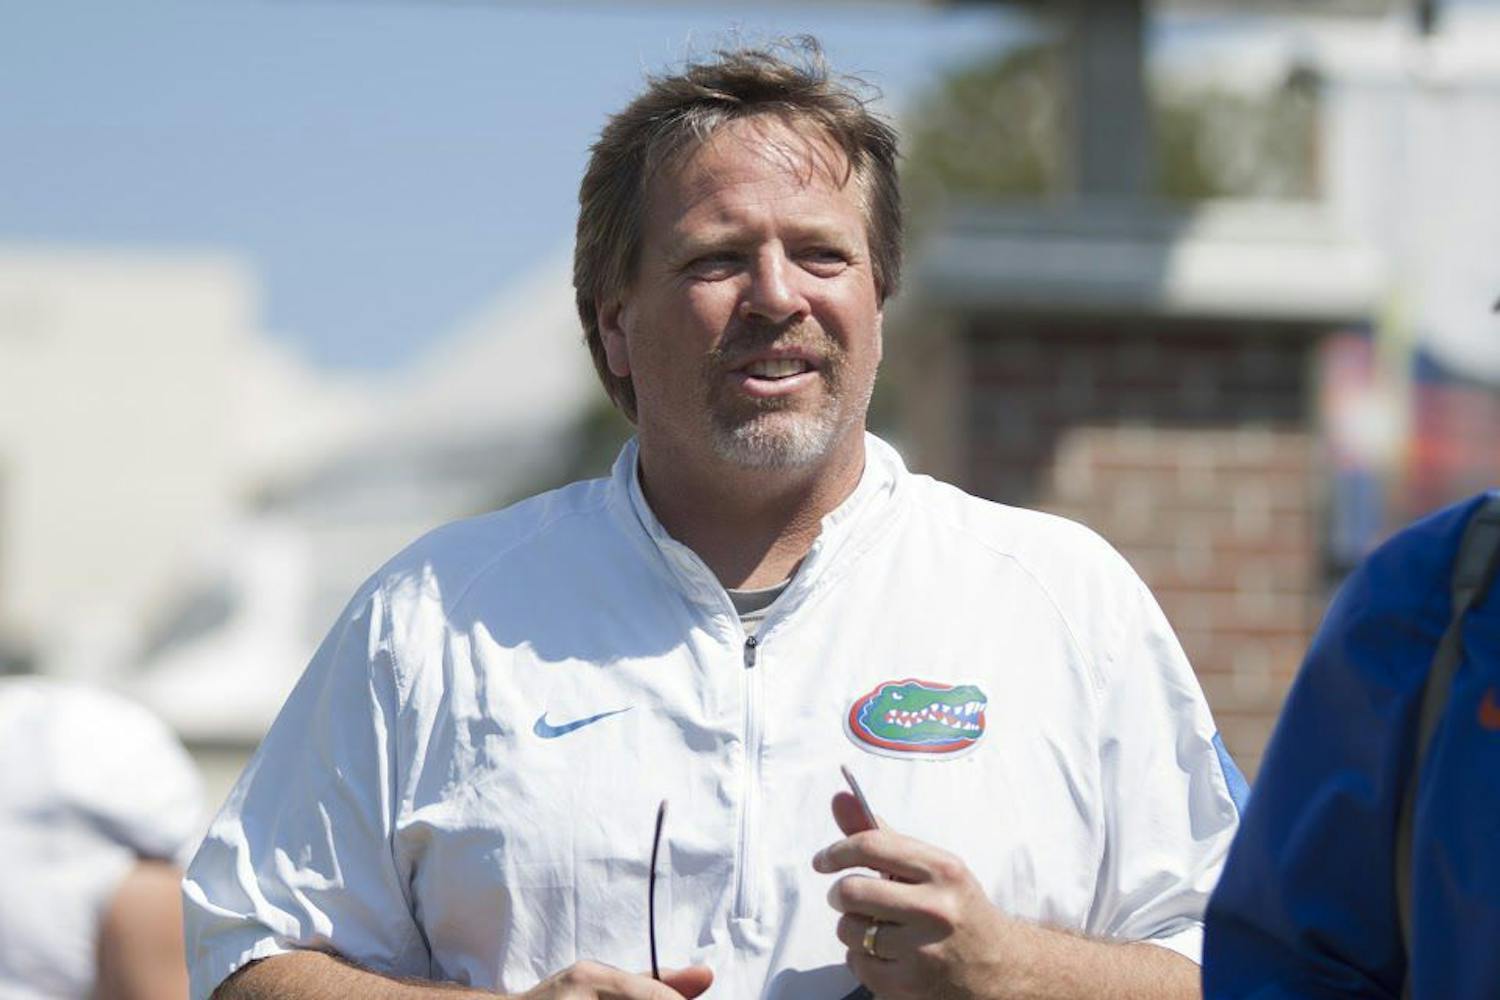 Florida head coach Jim McElwain looks on during a spring practice at the Sanders Practice Field on March 22, 2017.&nbsp;